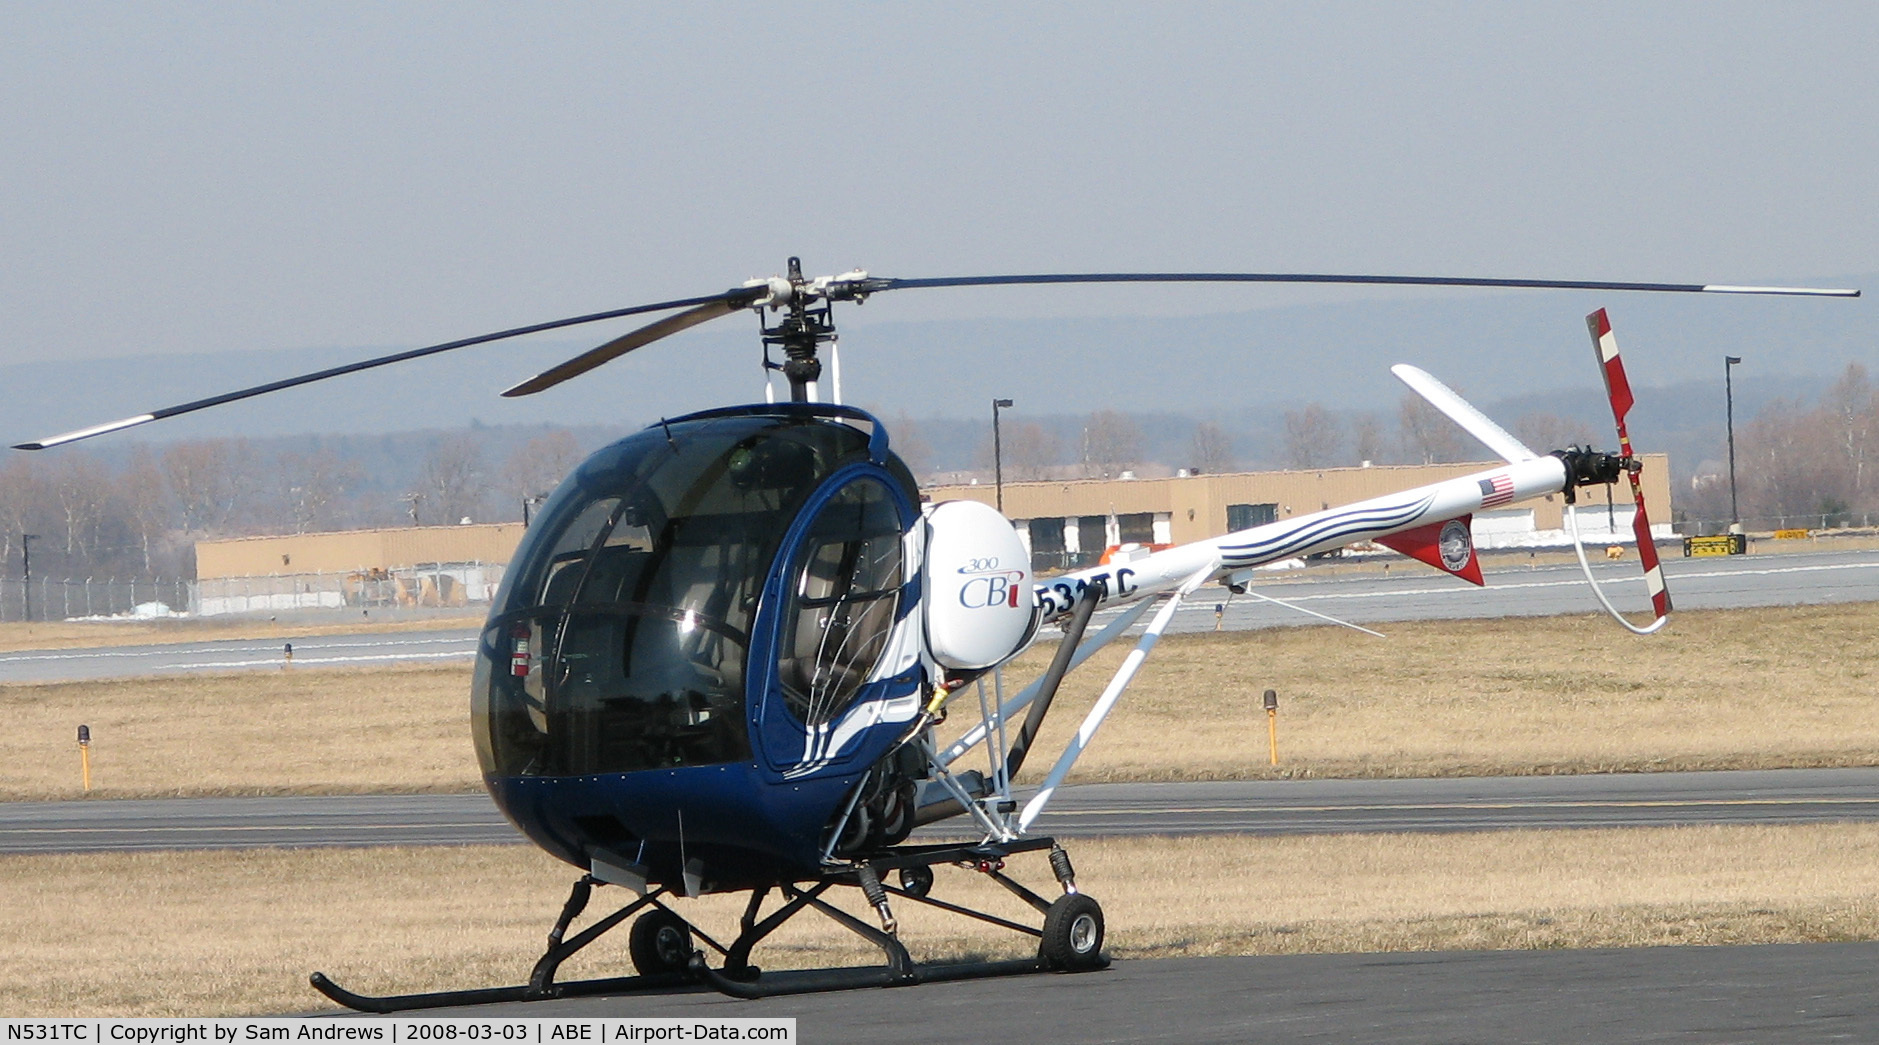 N531TC, 2007 Schweizer 269C-1 C/N 0285, This is the helo you want to train in if you are in eastern PA or western NJ